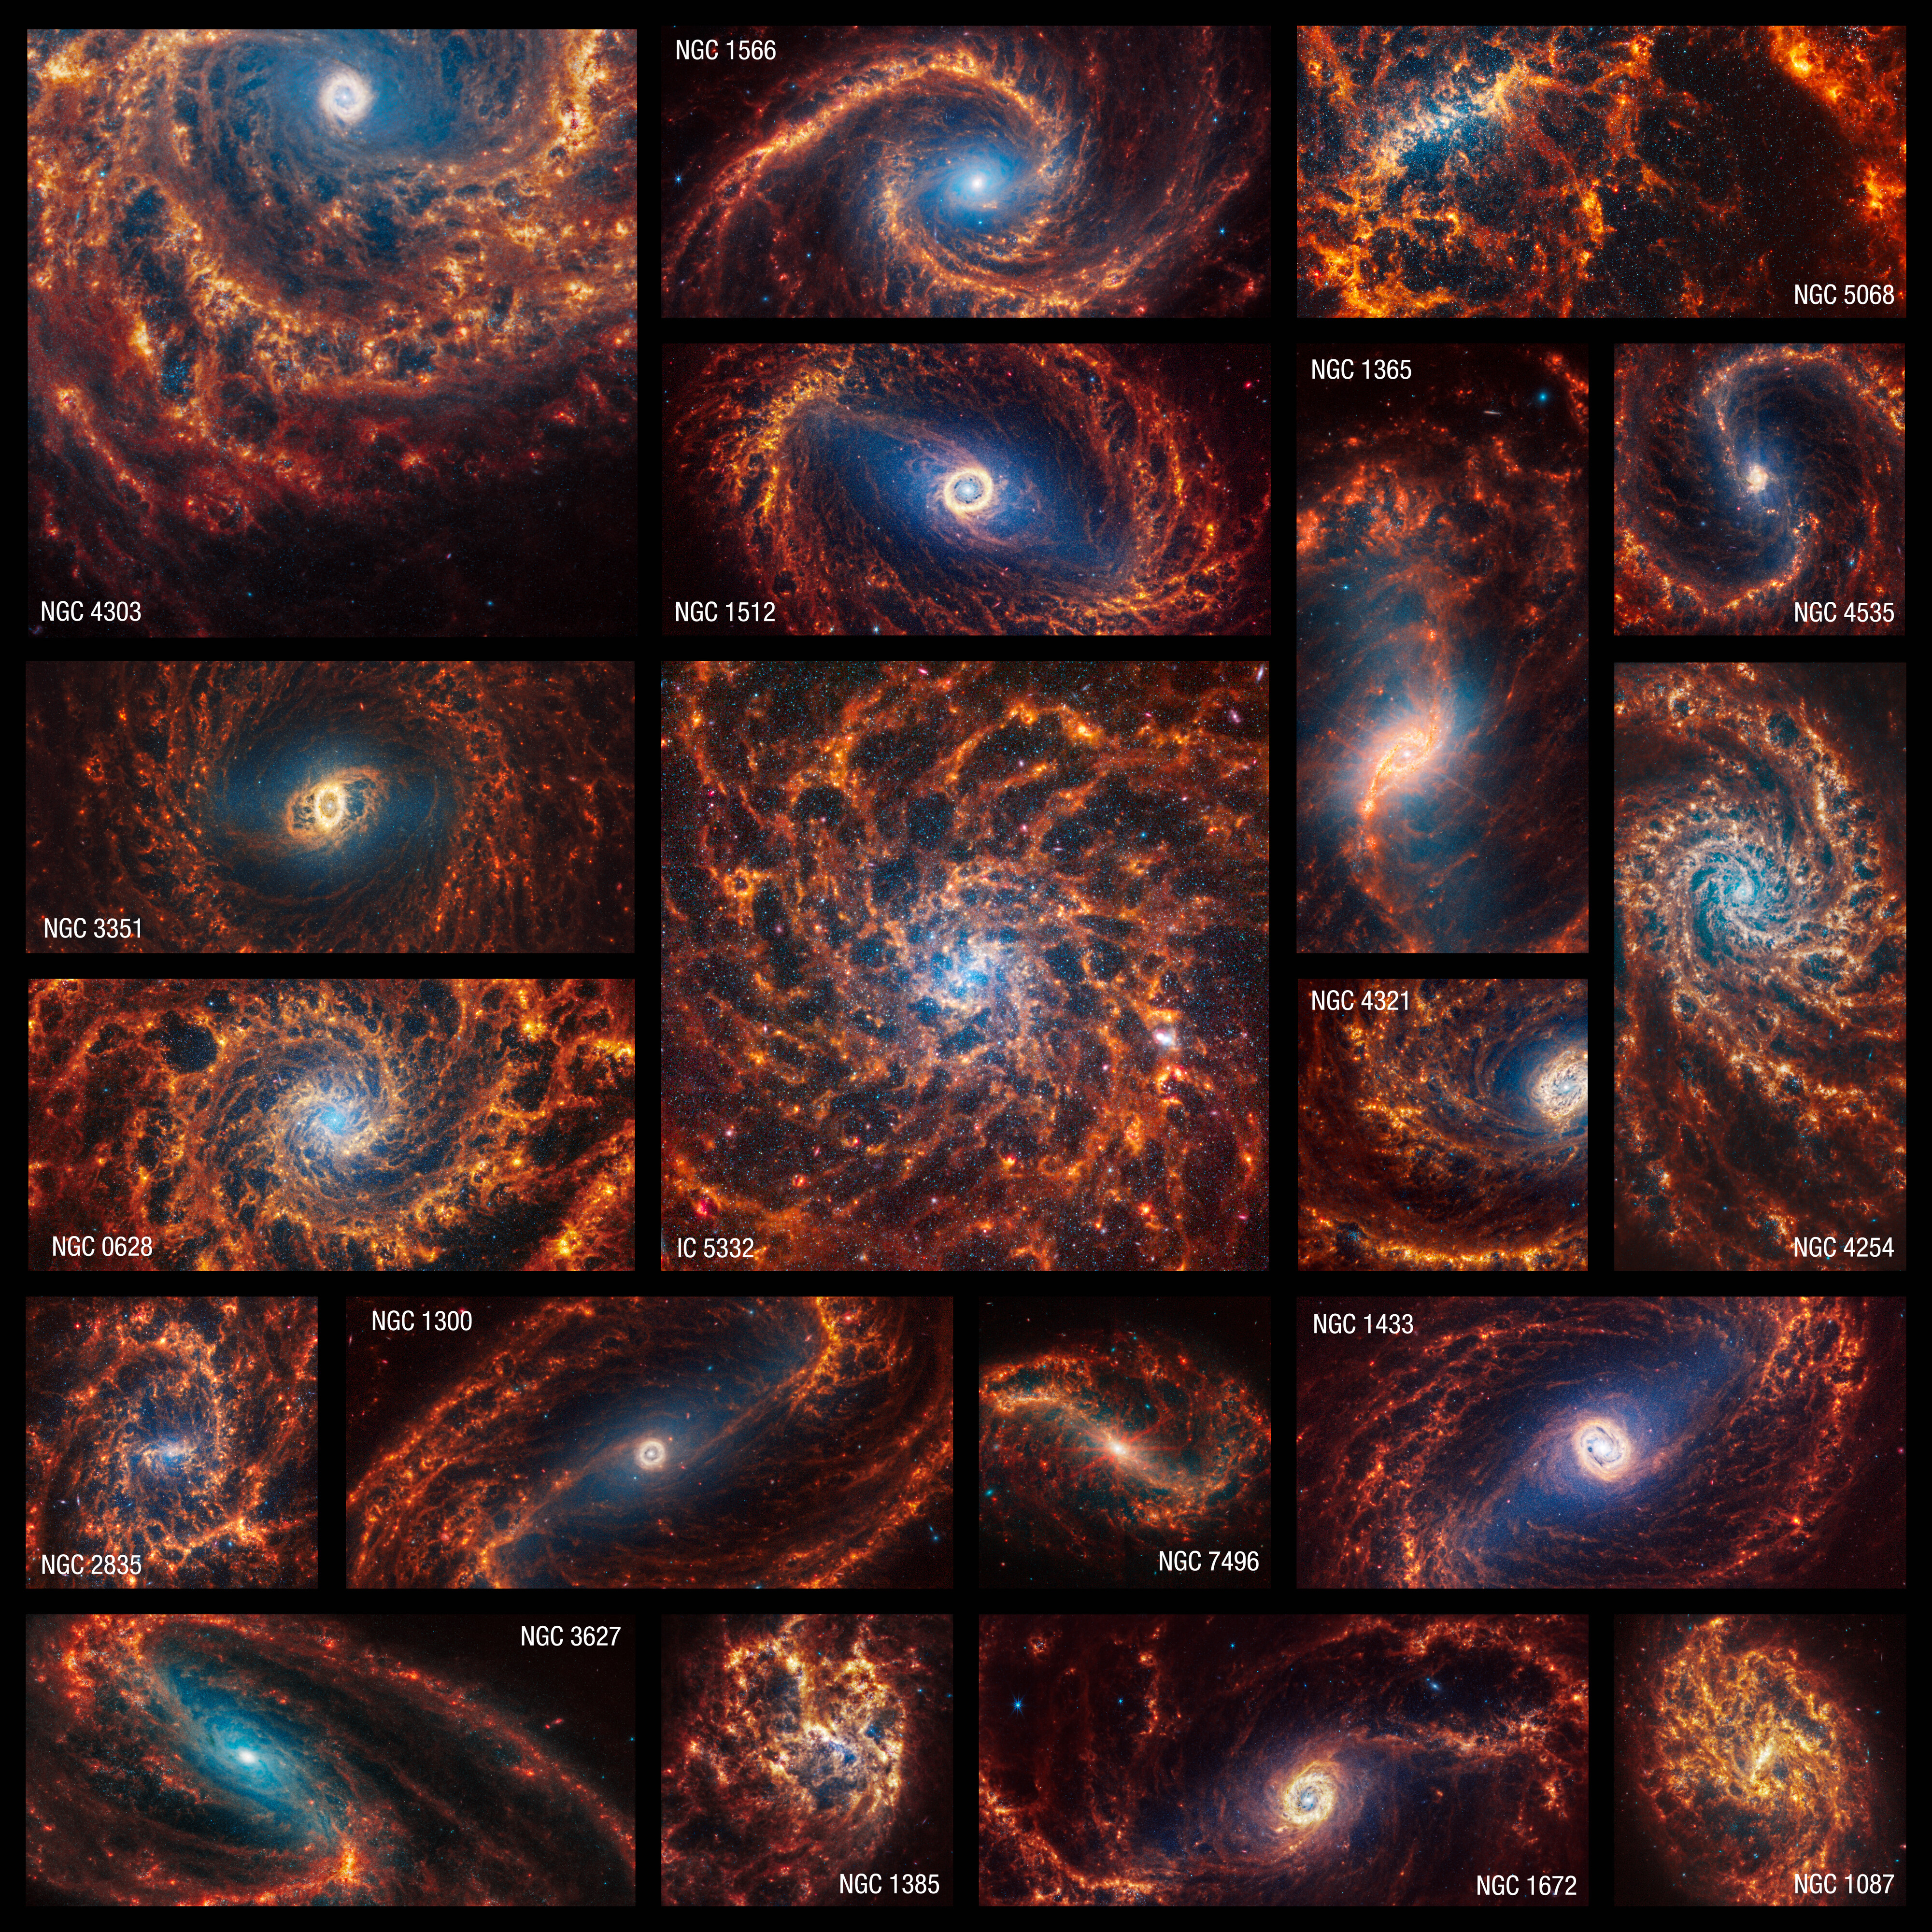 A mosaic image showing all 19 galaxies recently observed by the James Webb Space Telescope